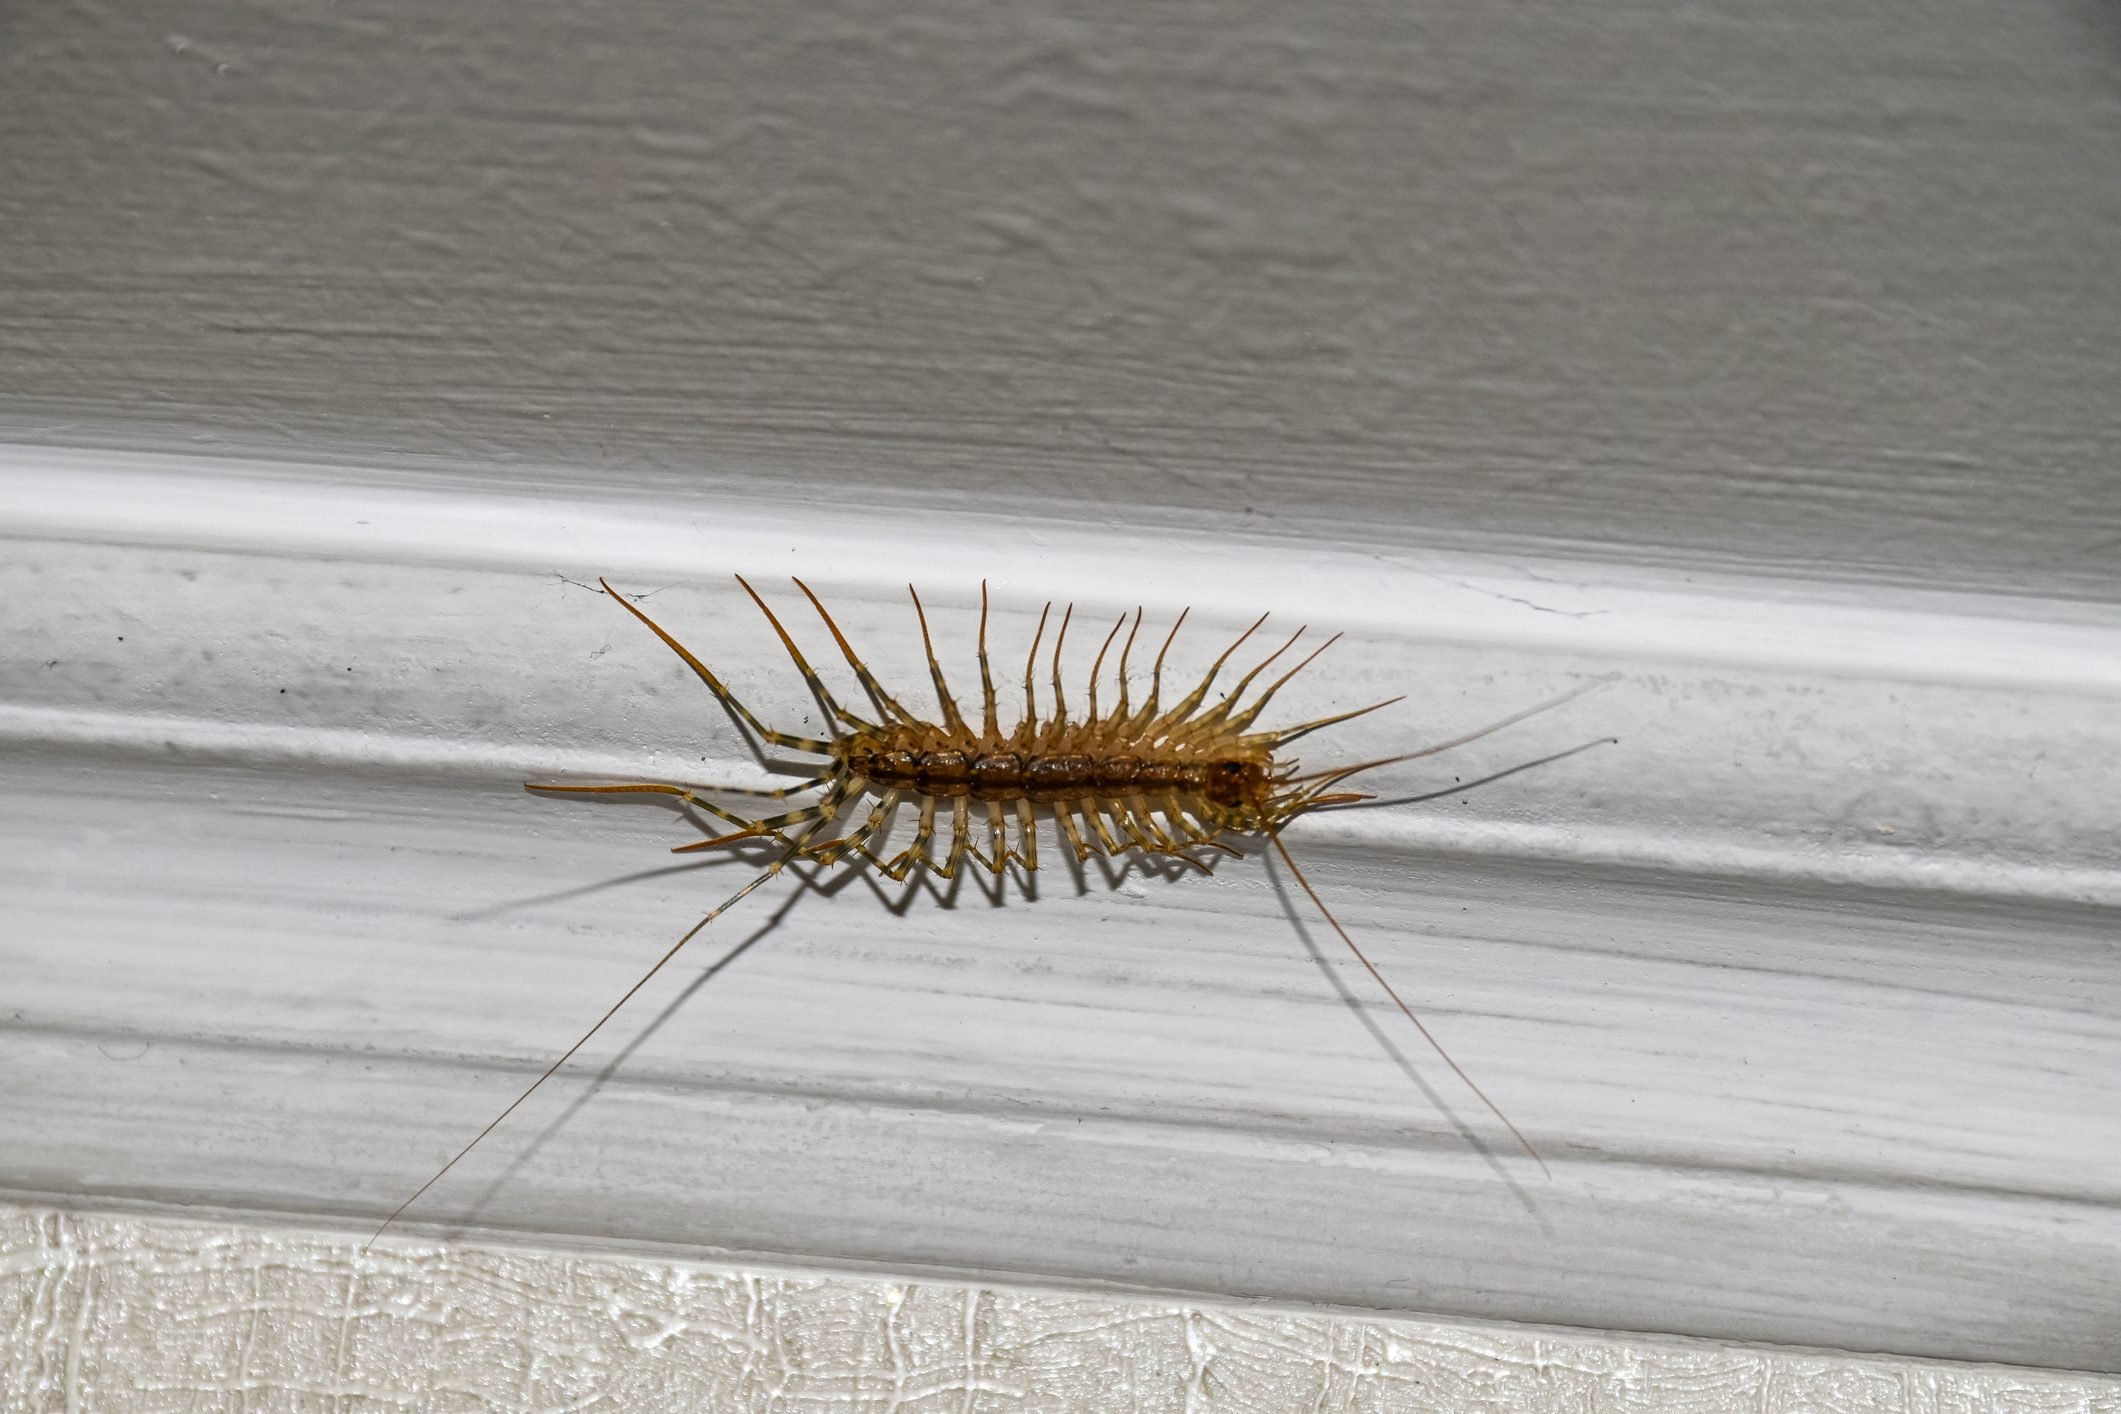 Things To Do When Pests Infest Your Home